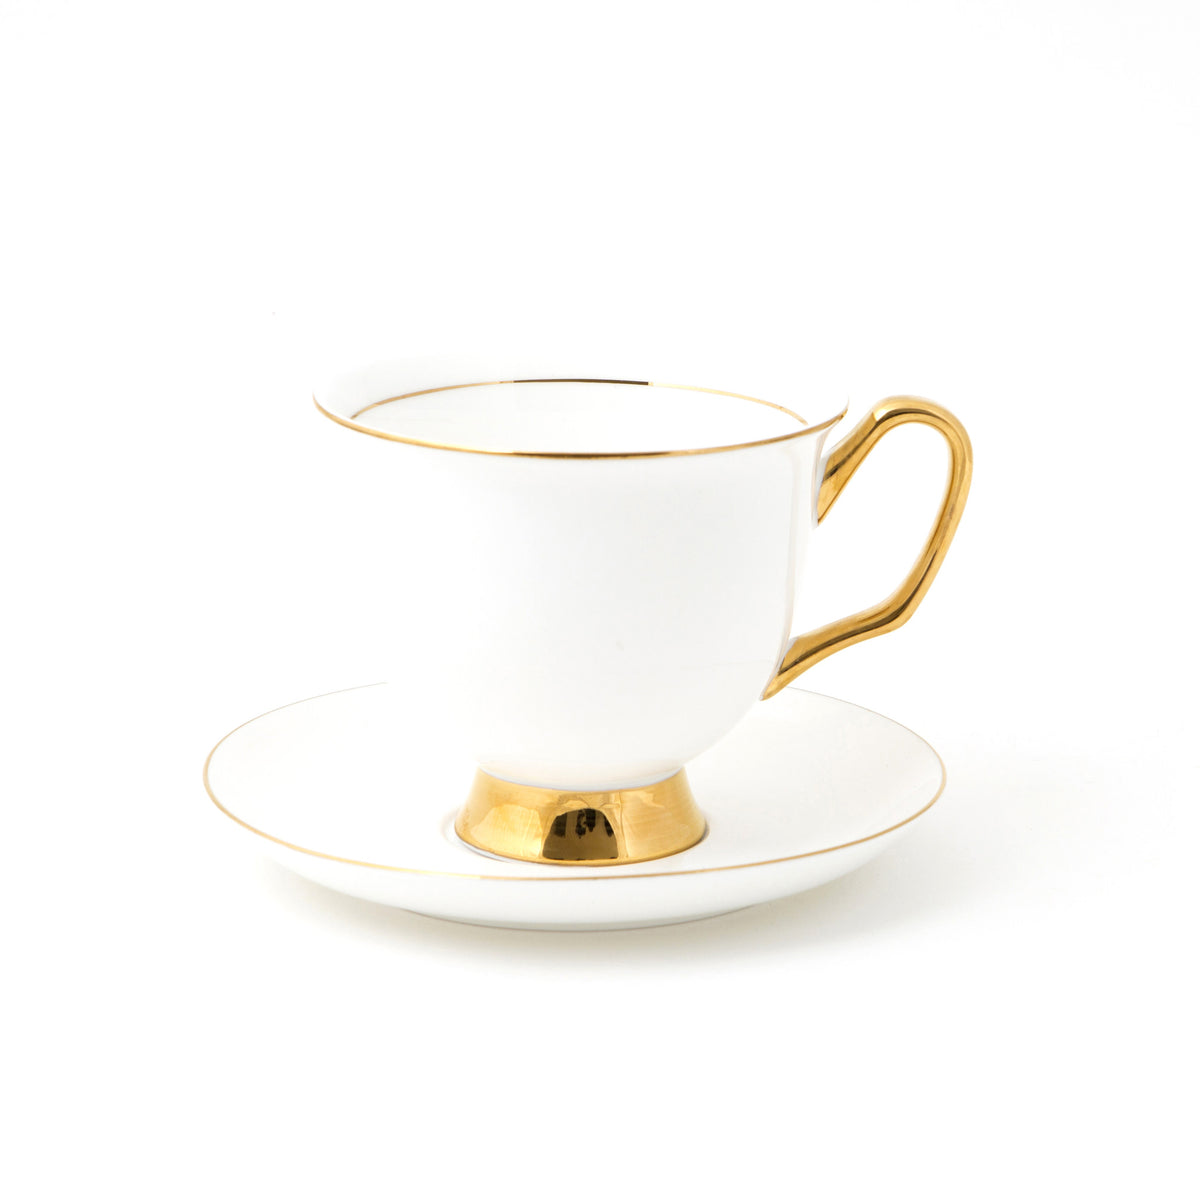 XL White Teacup and Saucer